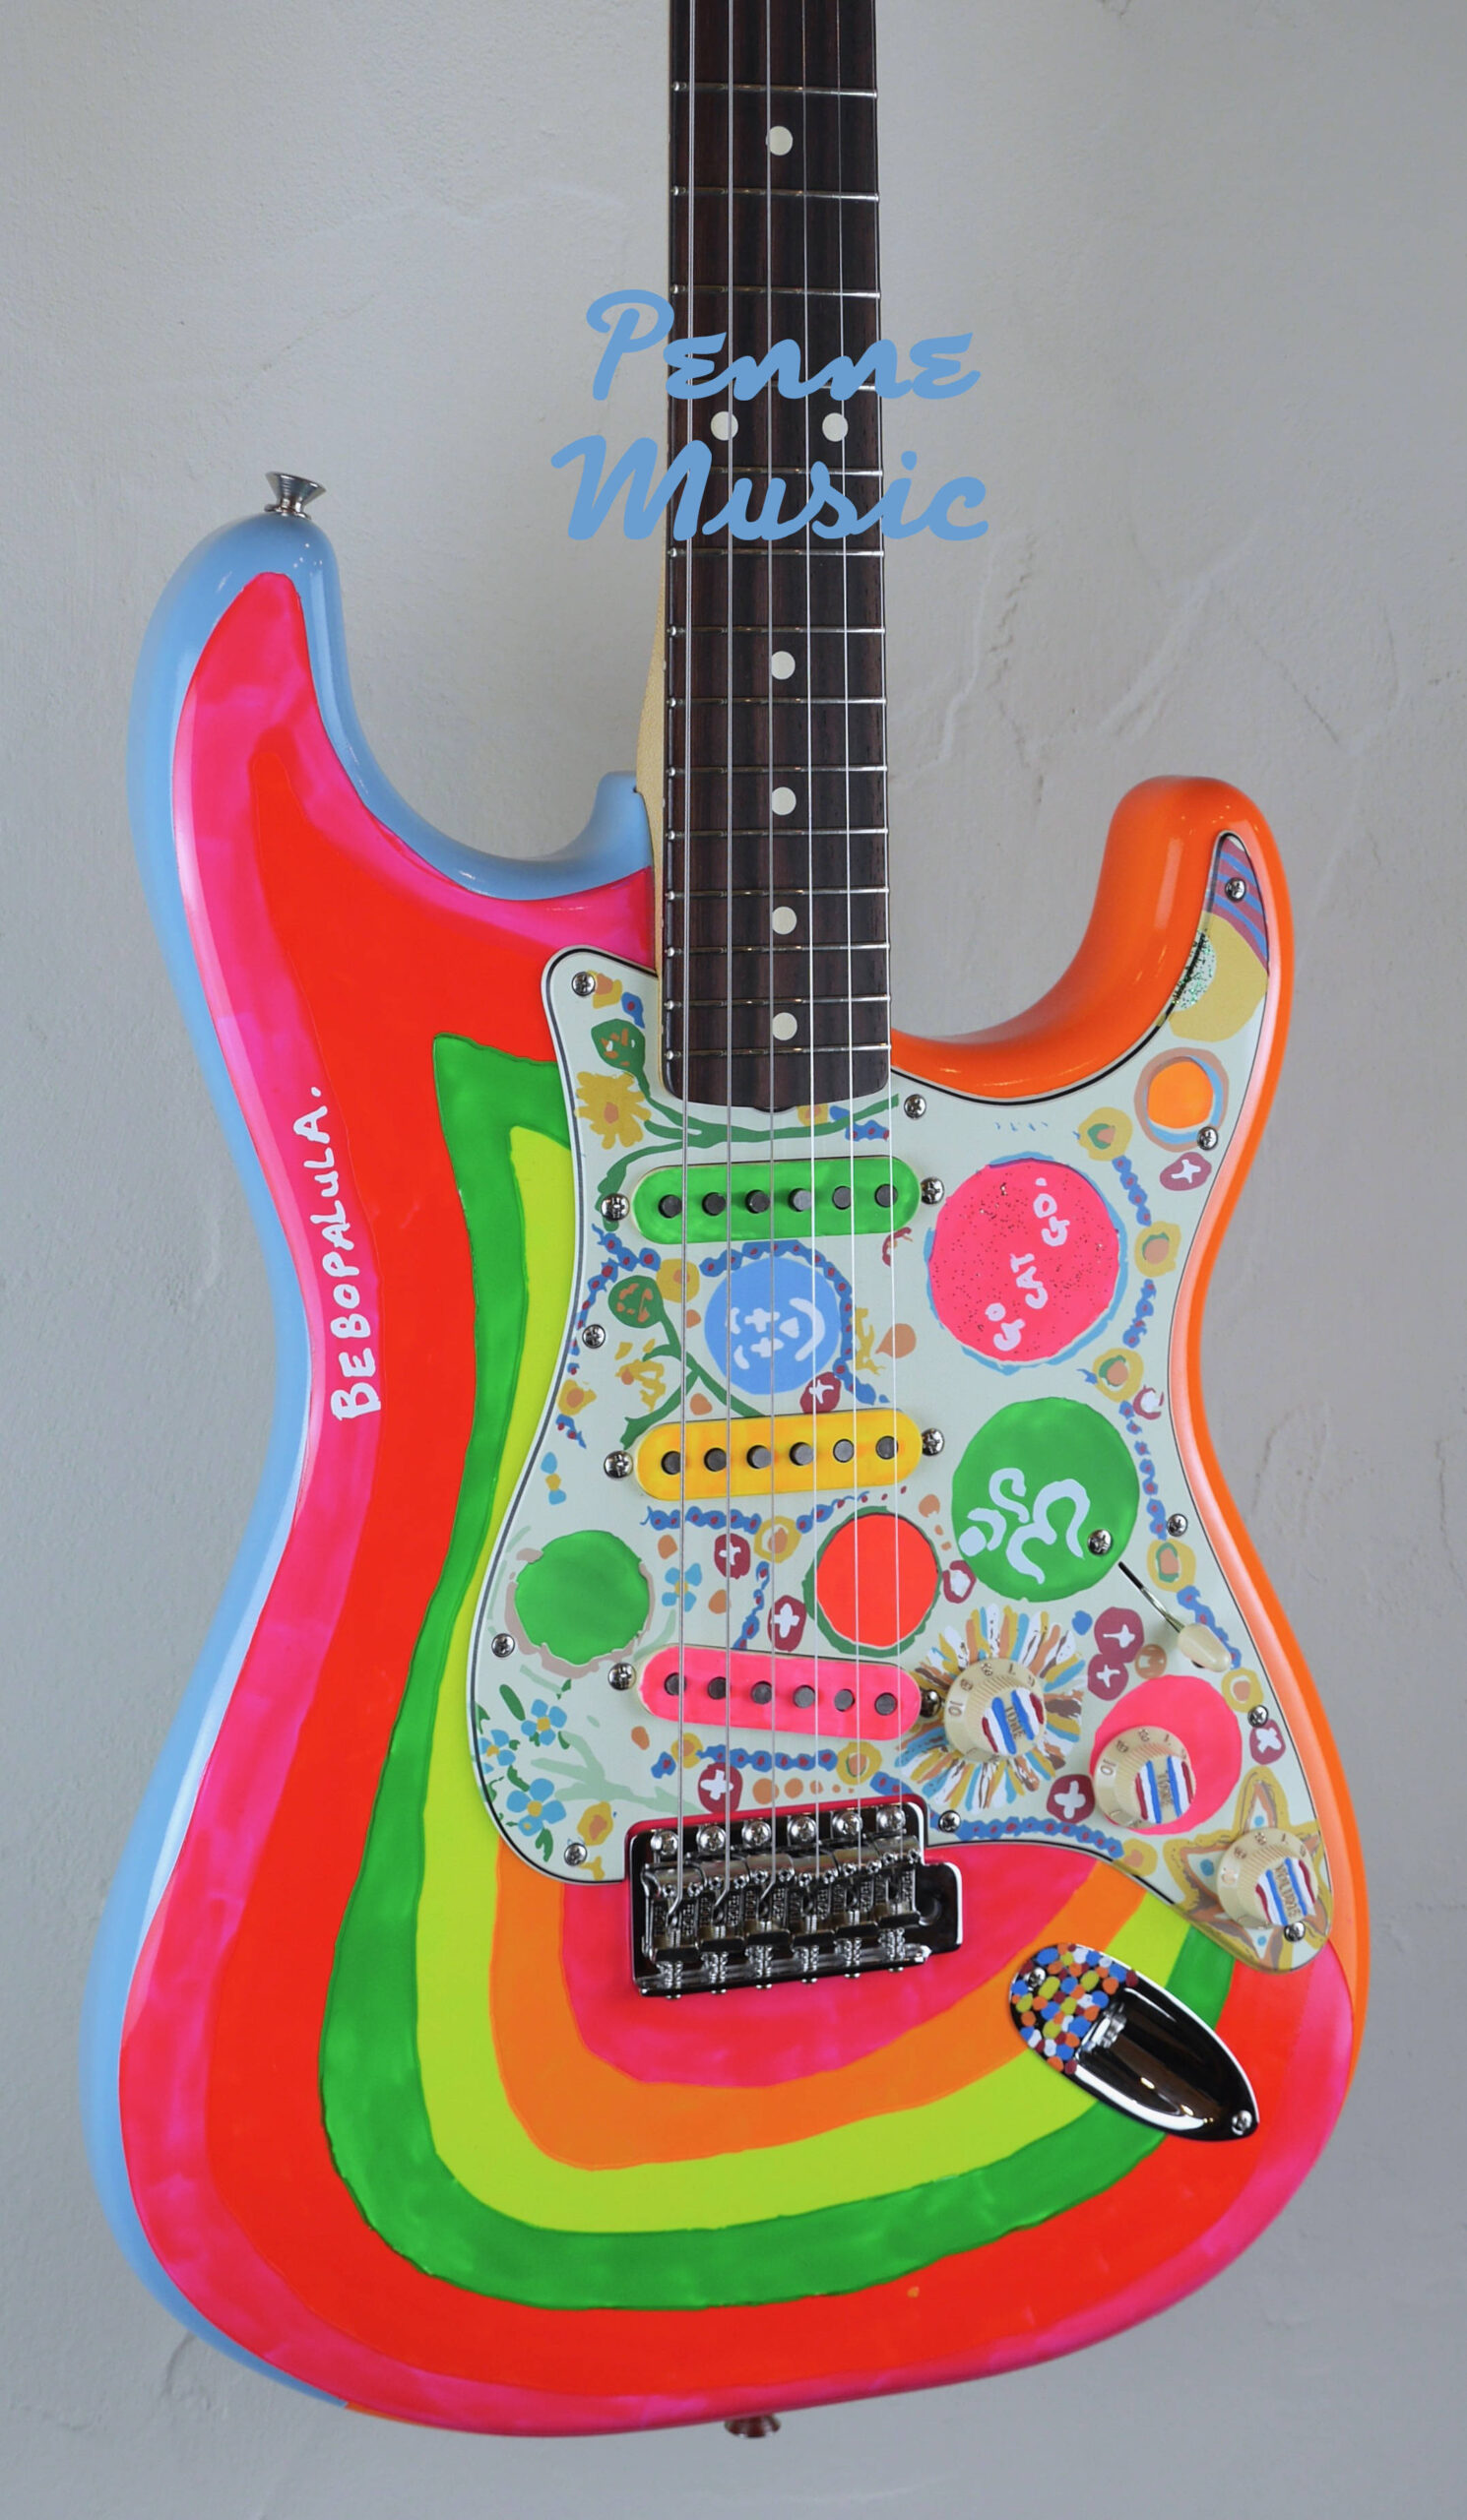 Fender Limited Edition George Harrison Rocky Stratocaster #13 of 1000 4